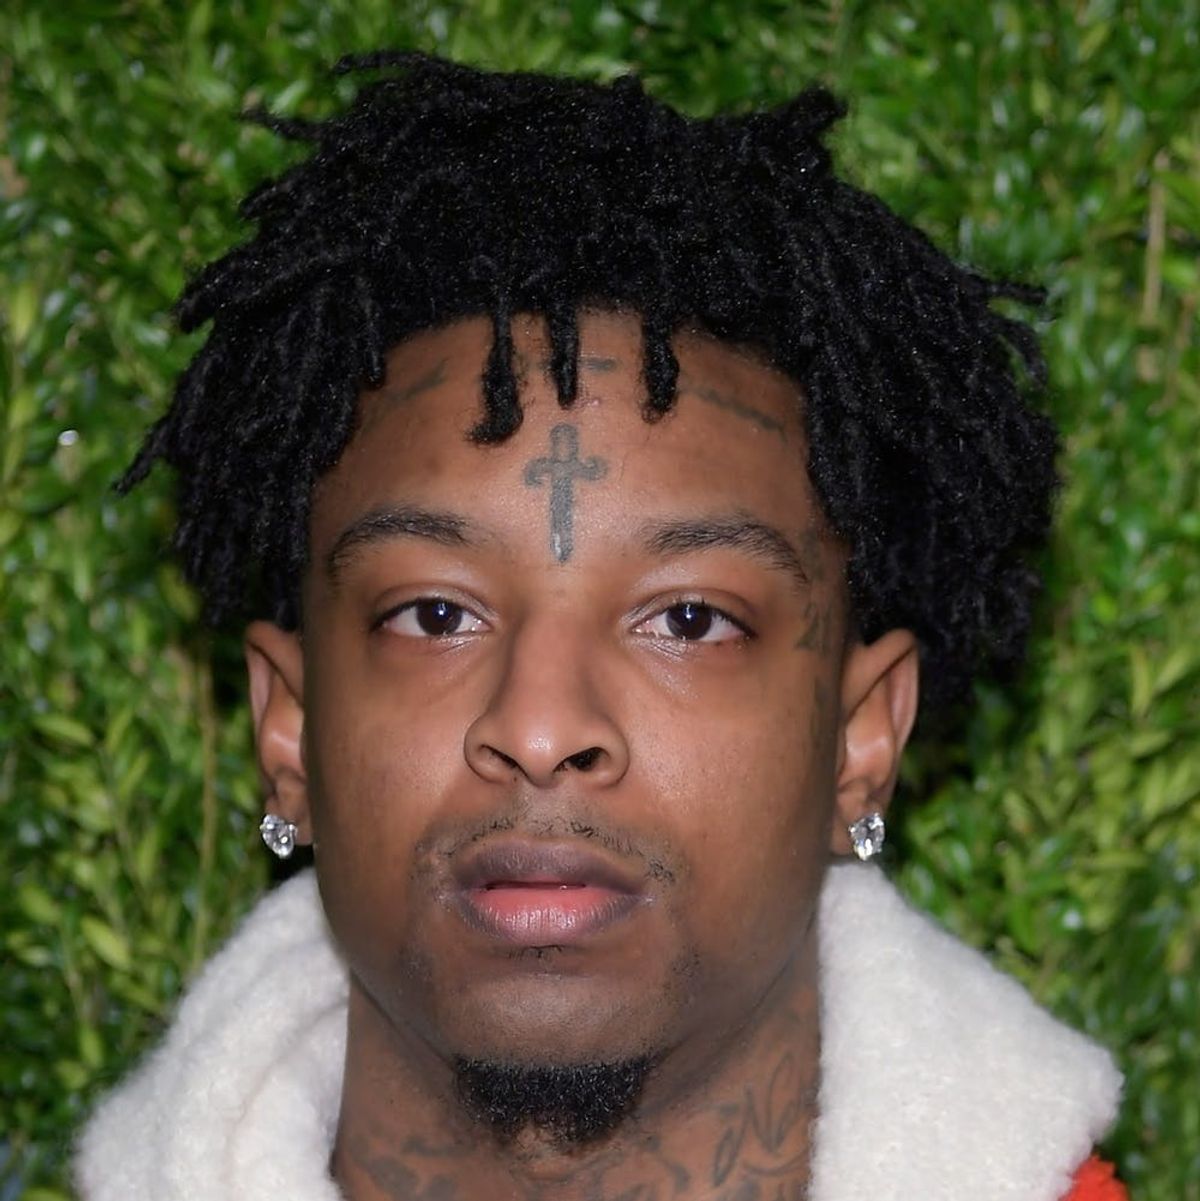 21 Savage’s ICE Arrest Shows Us the Limits of Birthright Citizenship Connections